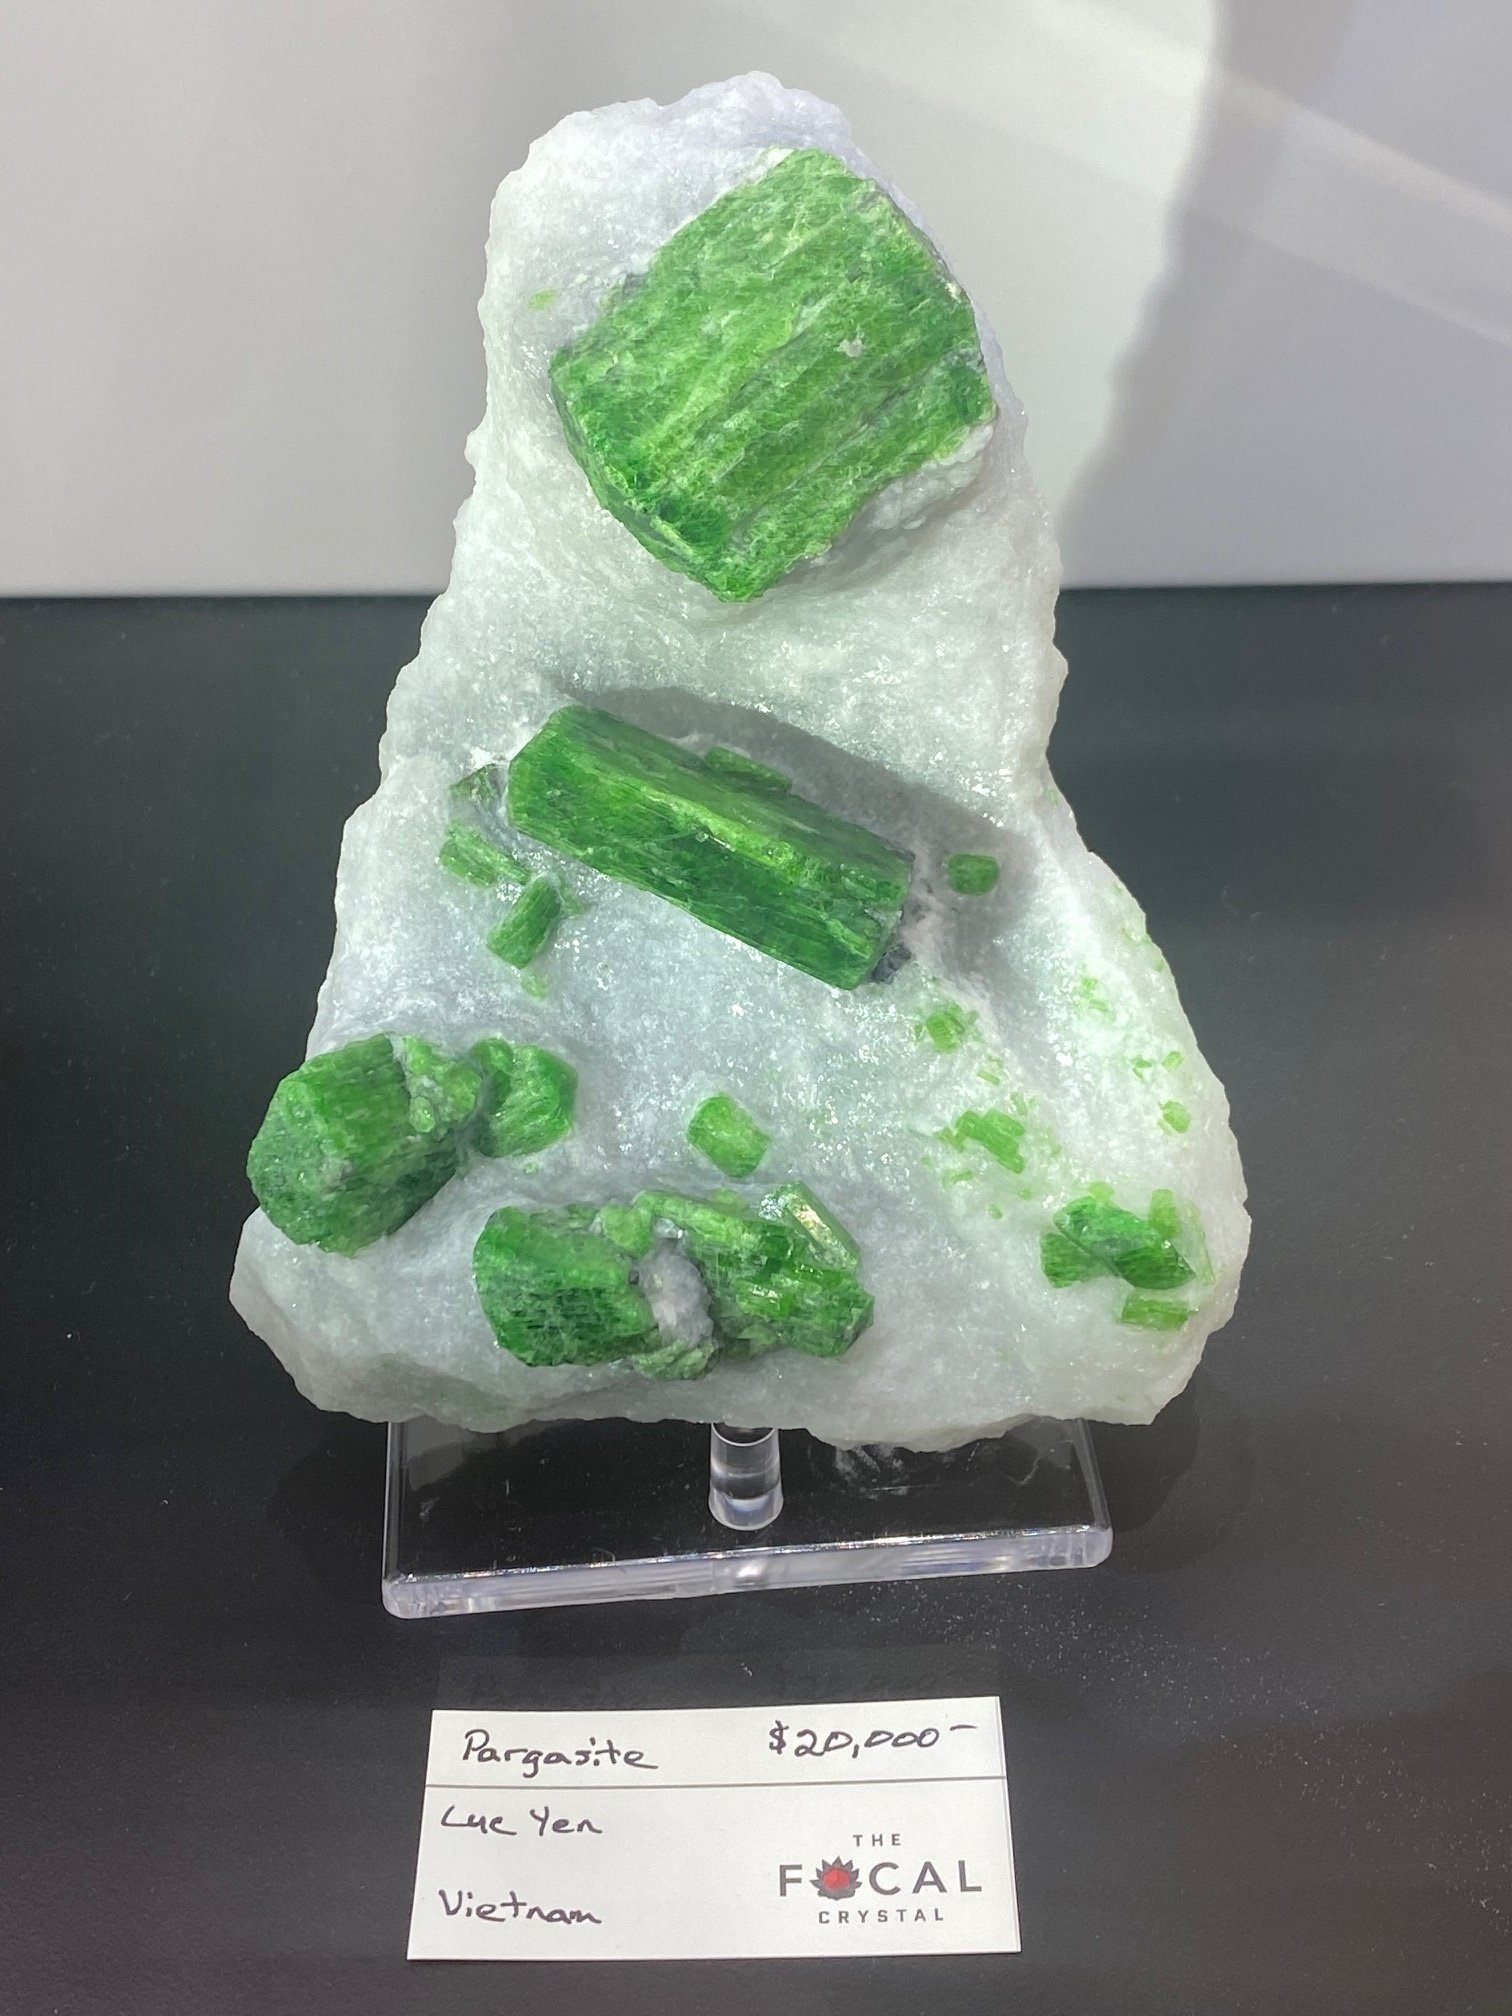 Superfine Pargasite, available